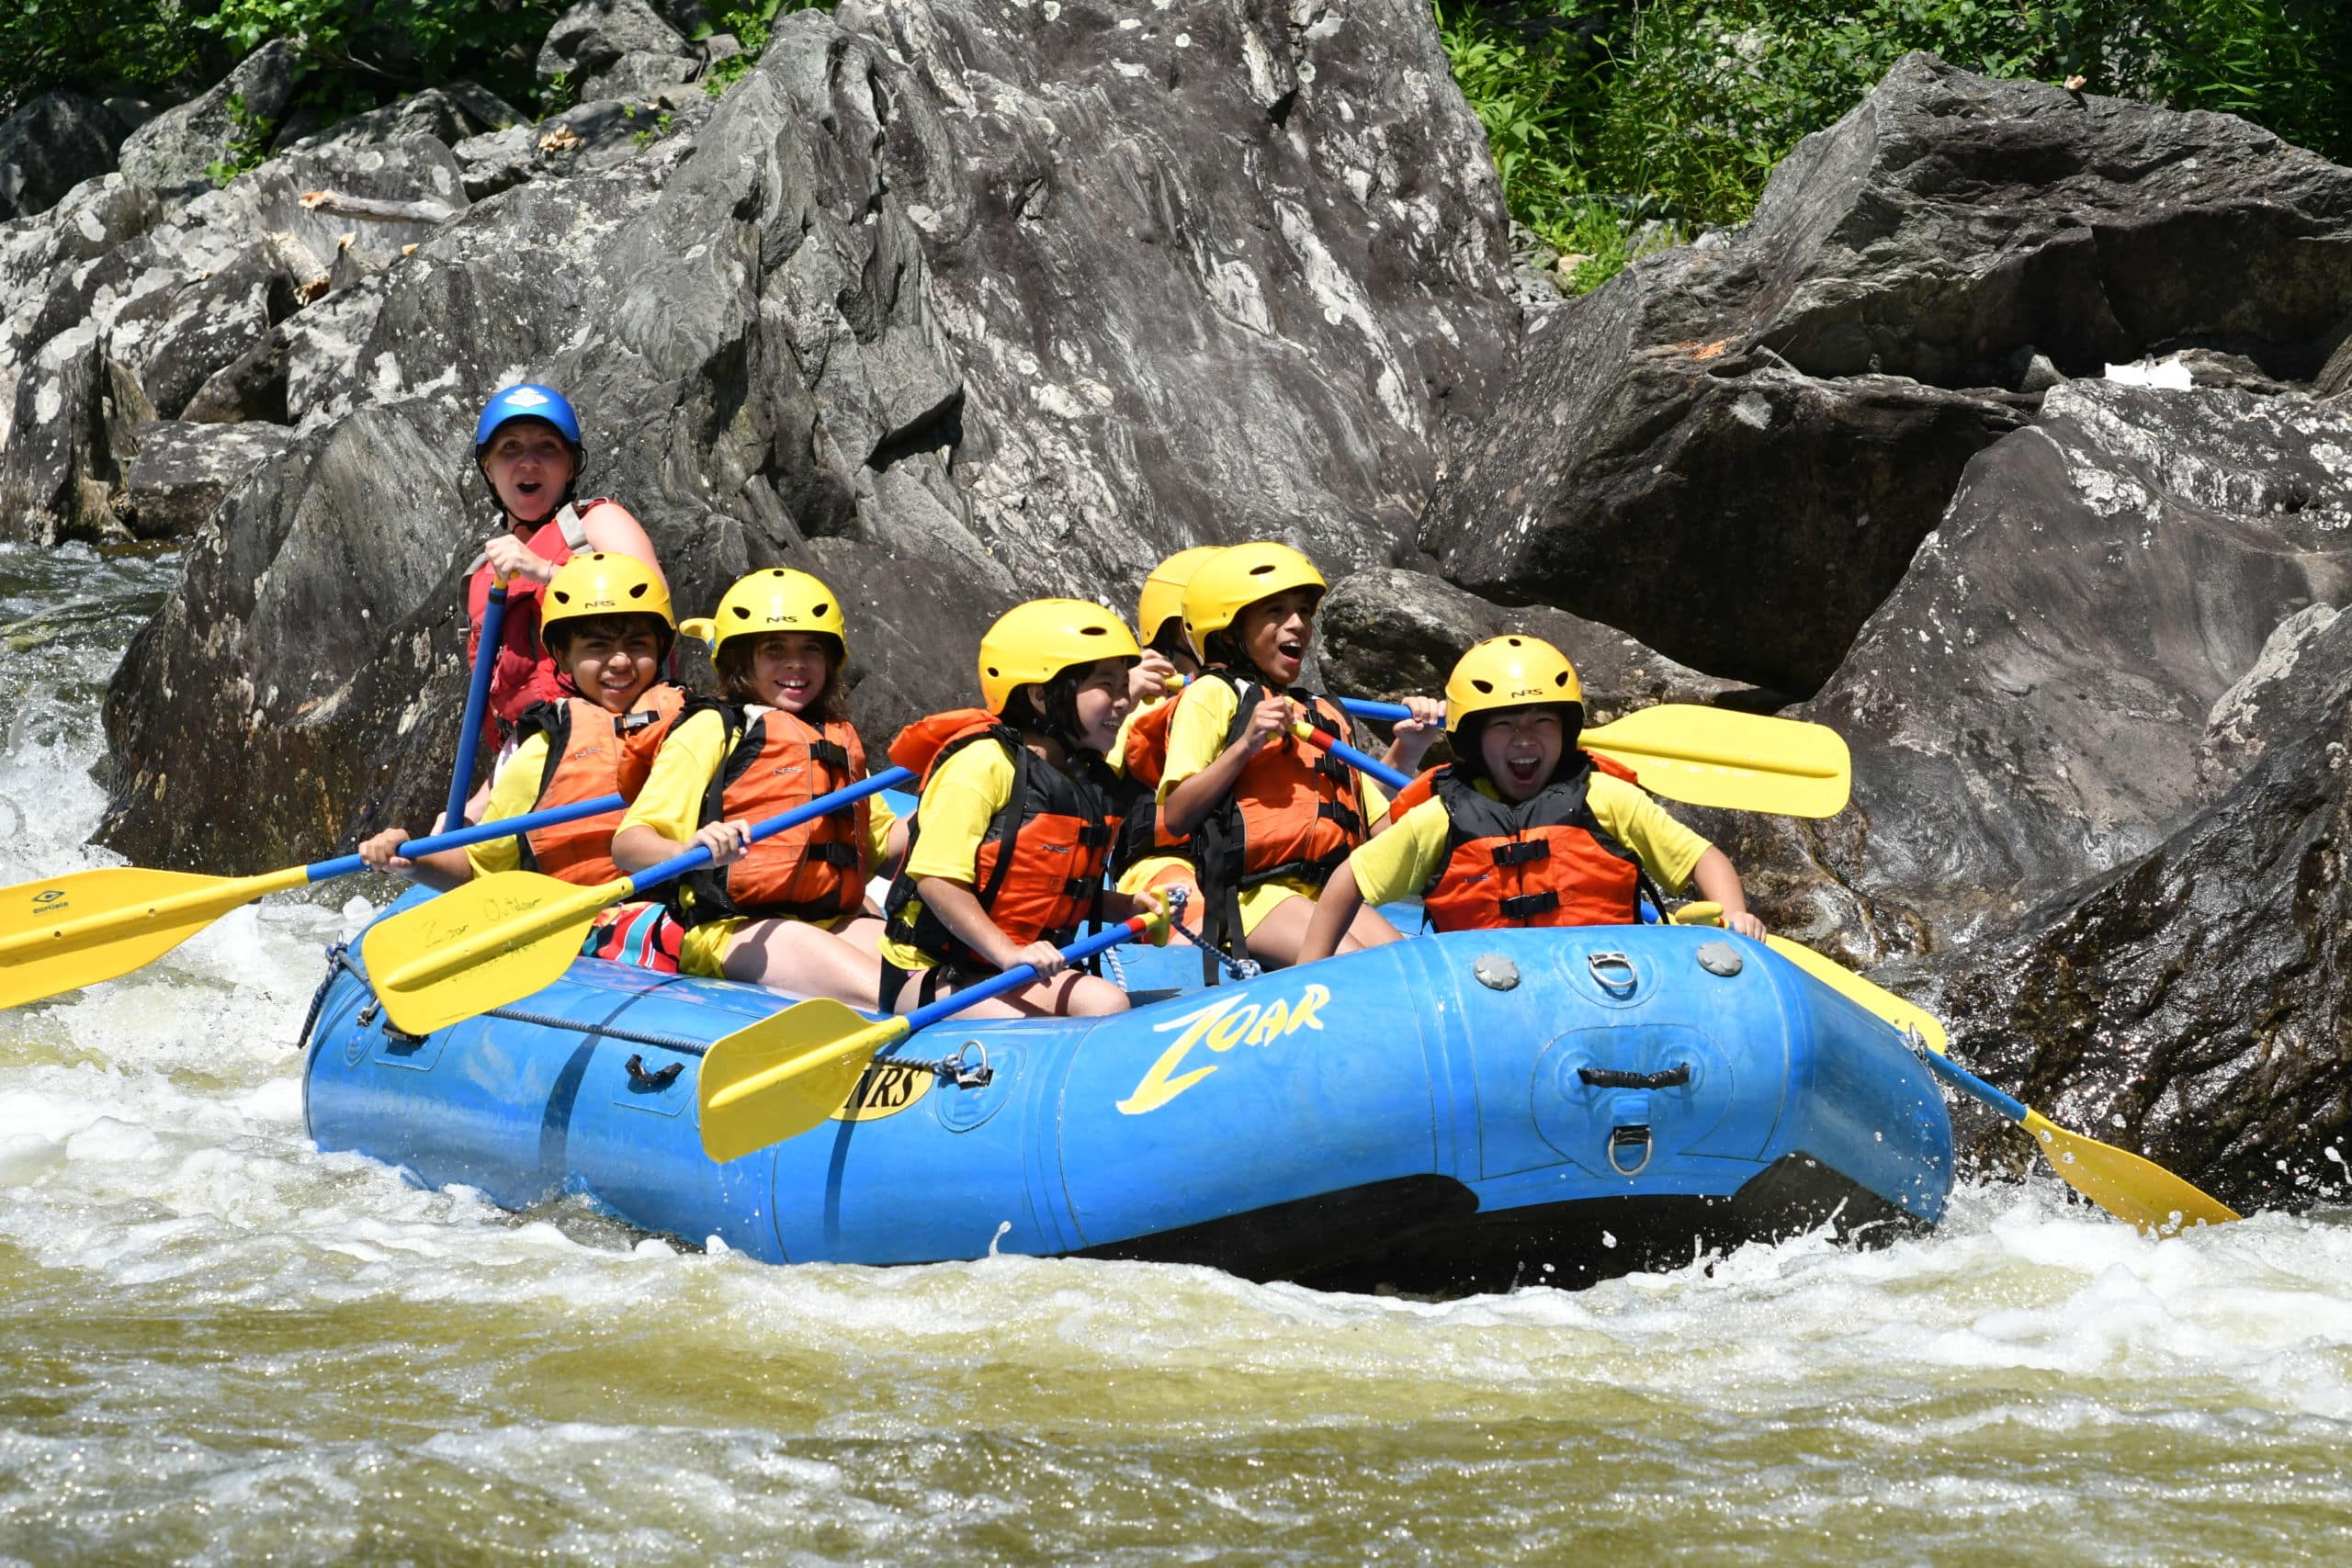 Guide with a group of young rafters headed through the Zoar Gap rapids